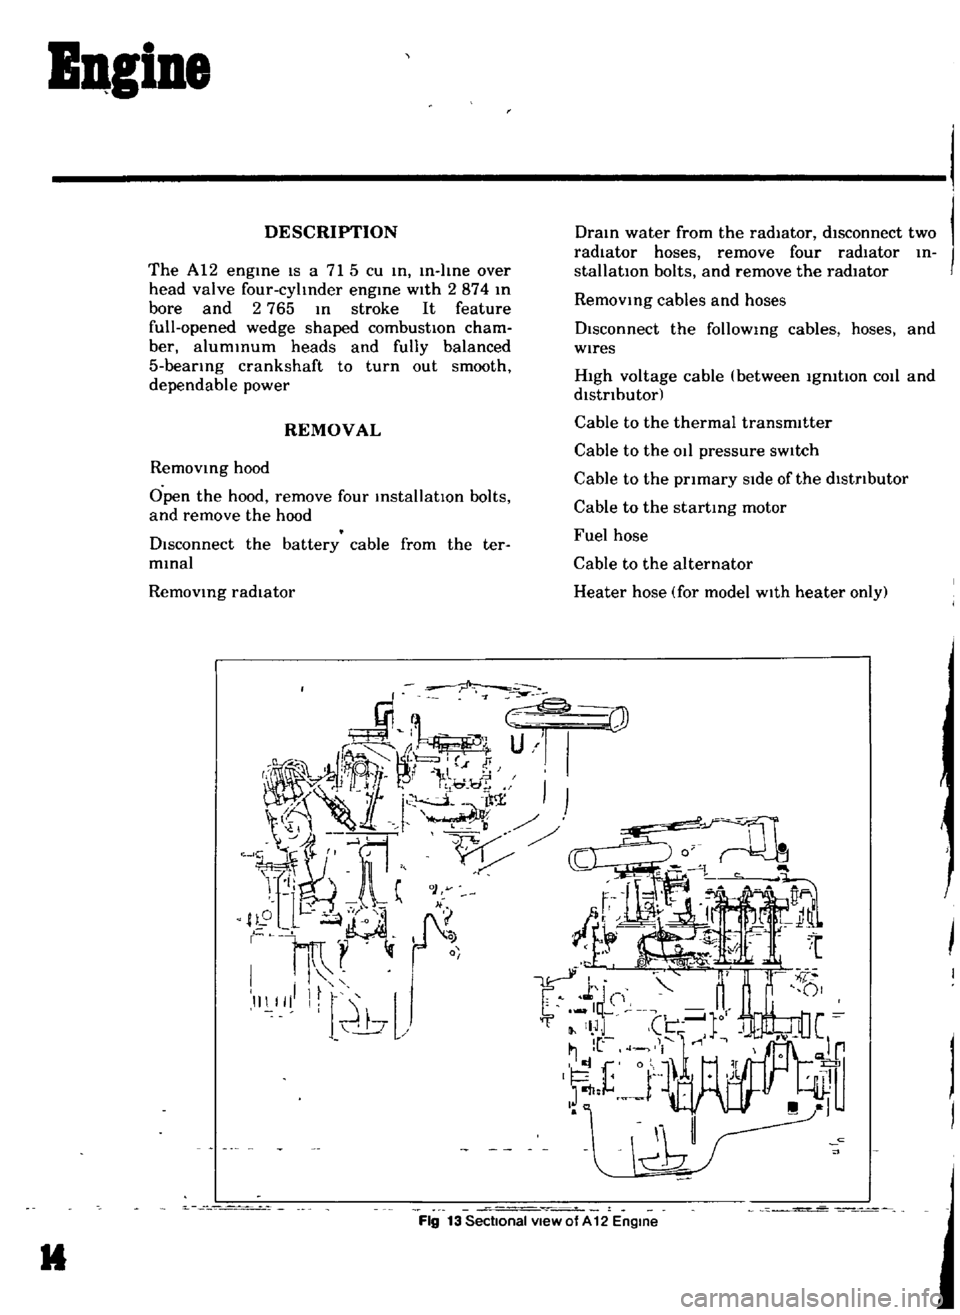 DATSUN B110 1969  Service Repair Manual 
IQgiDe

DESCRIPTION

The 
A12

engme 
IS 
a 
715

cu 
m 
In 
I

me 
over

head 
valve 
four

cyltnder 
engine 
with

2874 
m

bore

and 
2 
765 
m 
stroke 
It 
feature

full

opened 
wedge 
shaped 
c